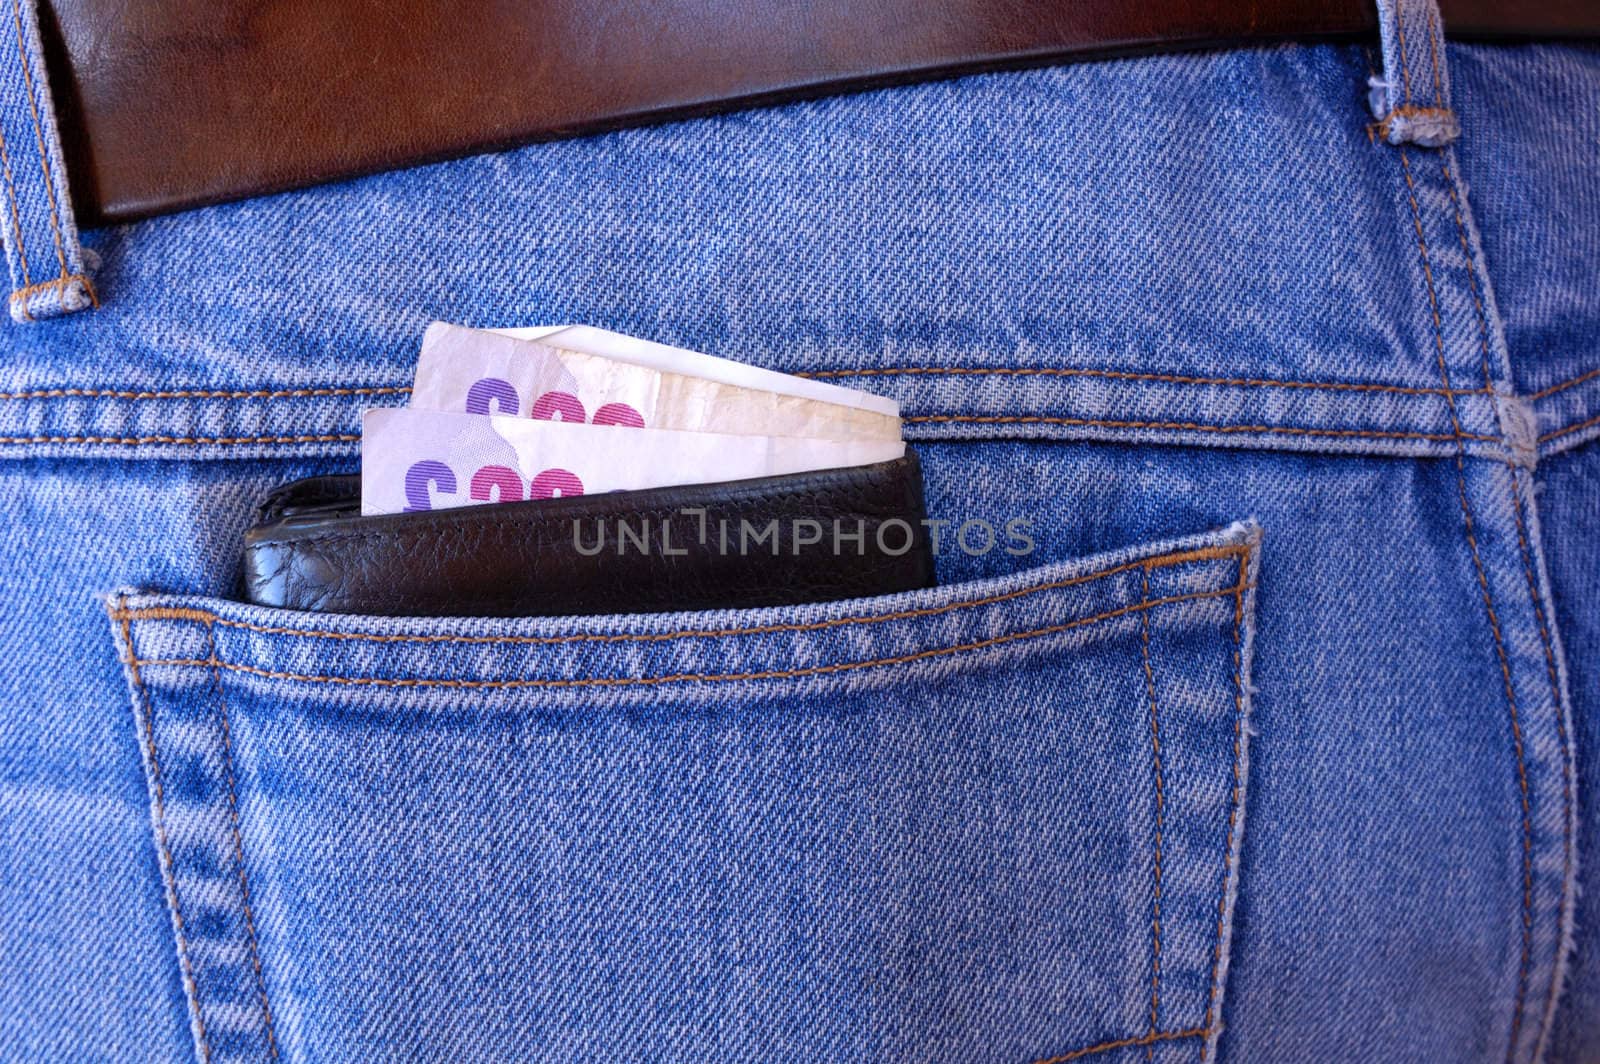 A wallet with several 20 pound bills in it pokes out of the rear pocket of someone's jeans. A temptation for a pickpocket.